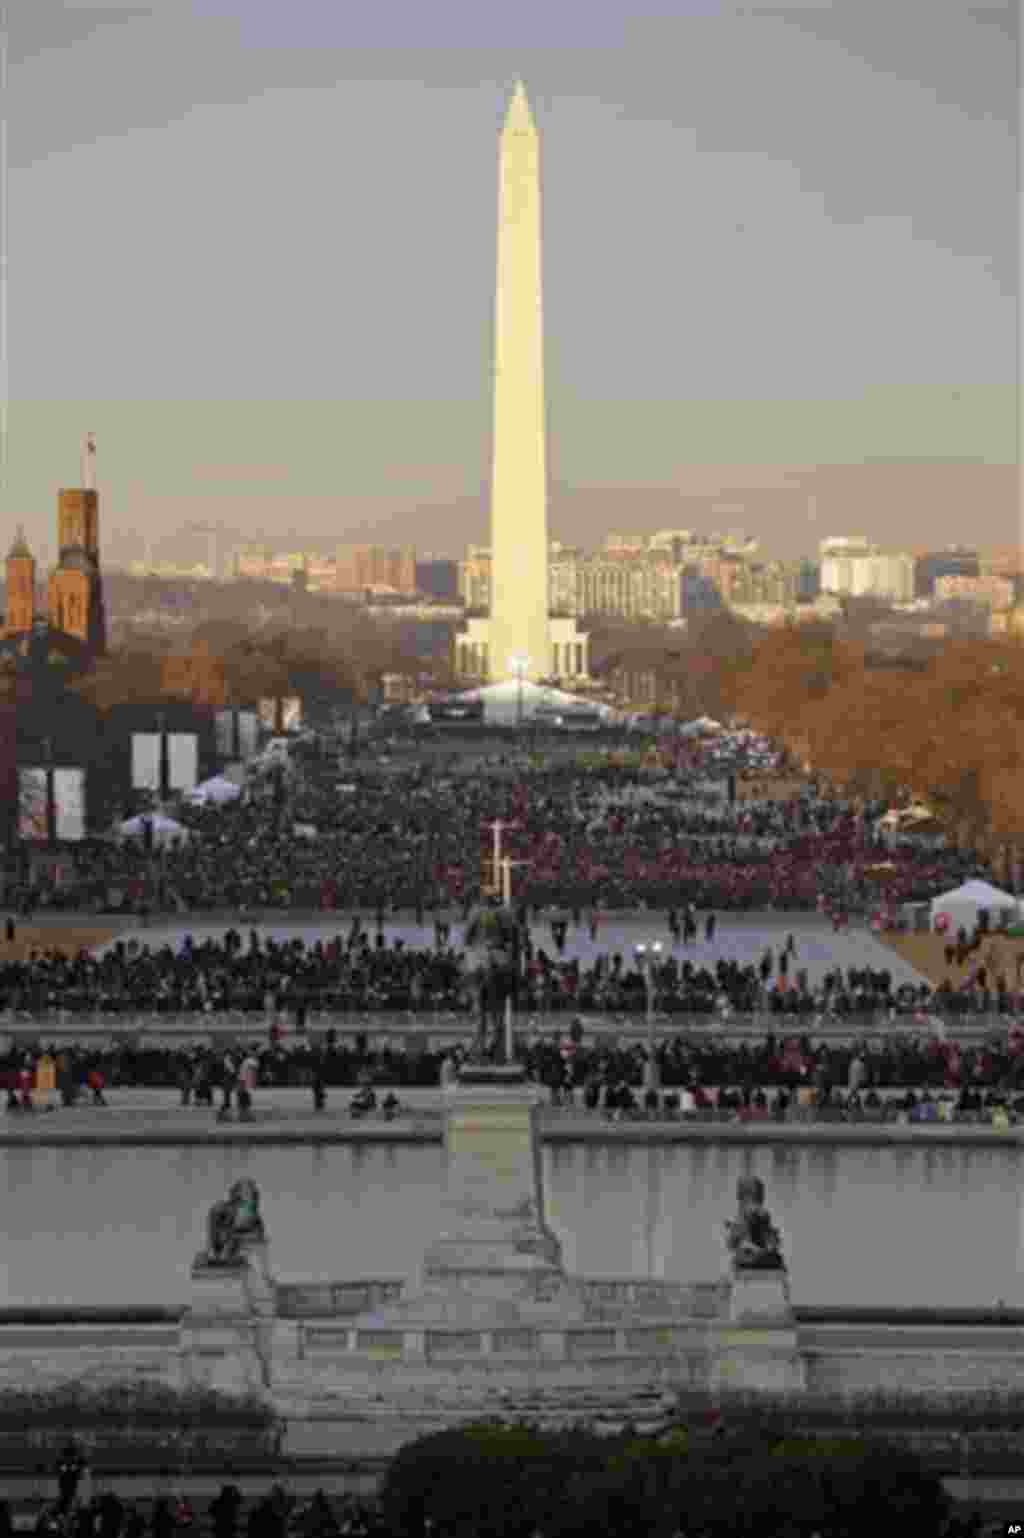 The crowd starts to fill up the National Mall early in the morning before the ceremonial swearing-in of President Barack Obama at the U.S. Capitol during the 57th Presidential Inauguration in Washington, Monday, Jan. 21, 2013. (AP Photo/Pablo Martinez Mon